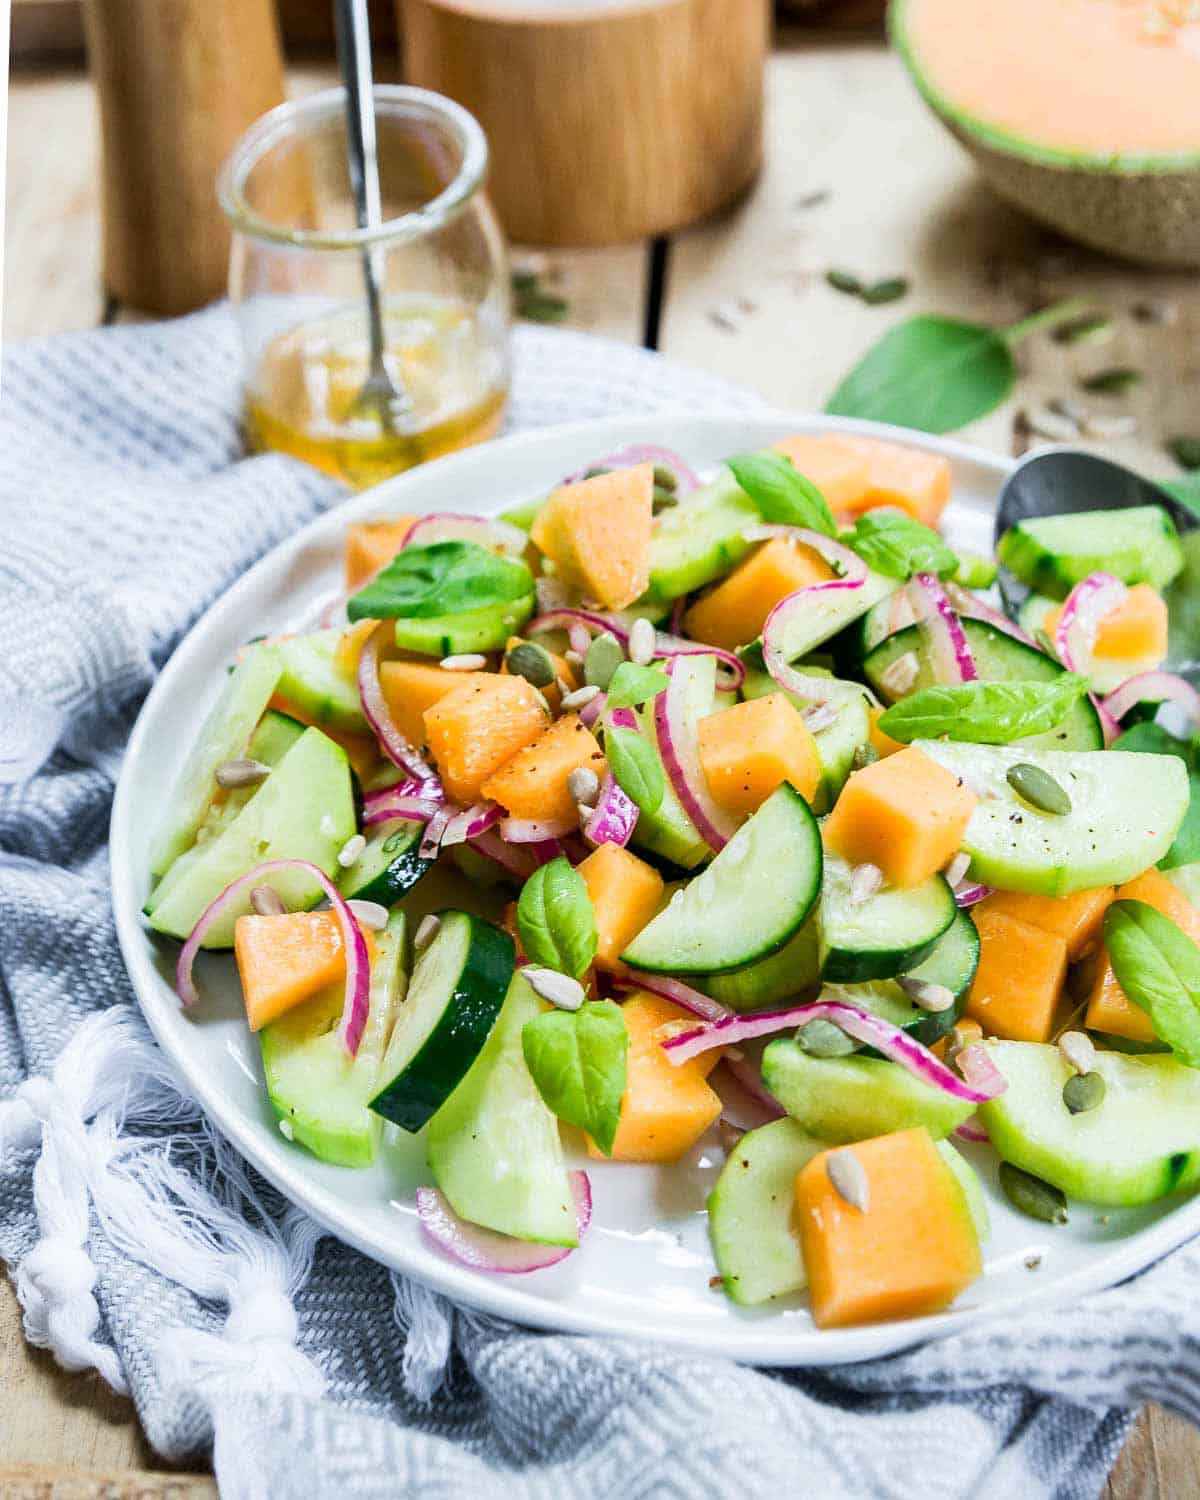 This cucumber melon salad is a great summer salad. With pickled onions and sweet, ripe cantaloupe, it goes great alongside any grilled meat.